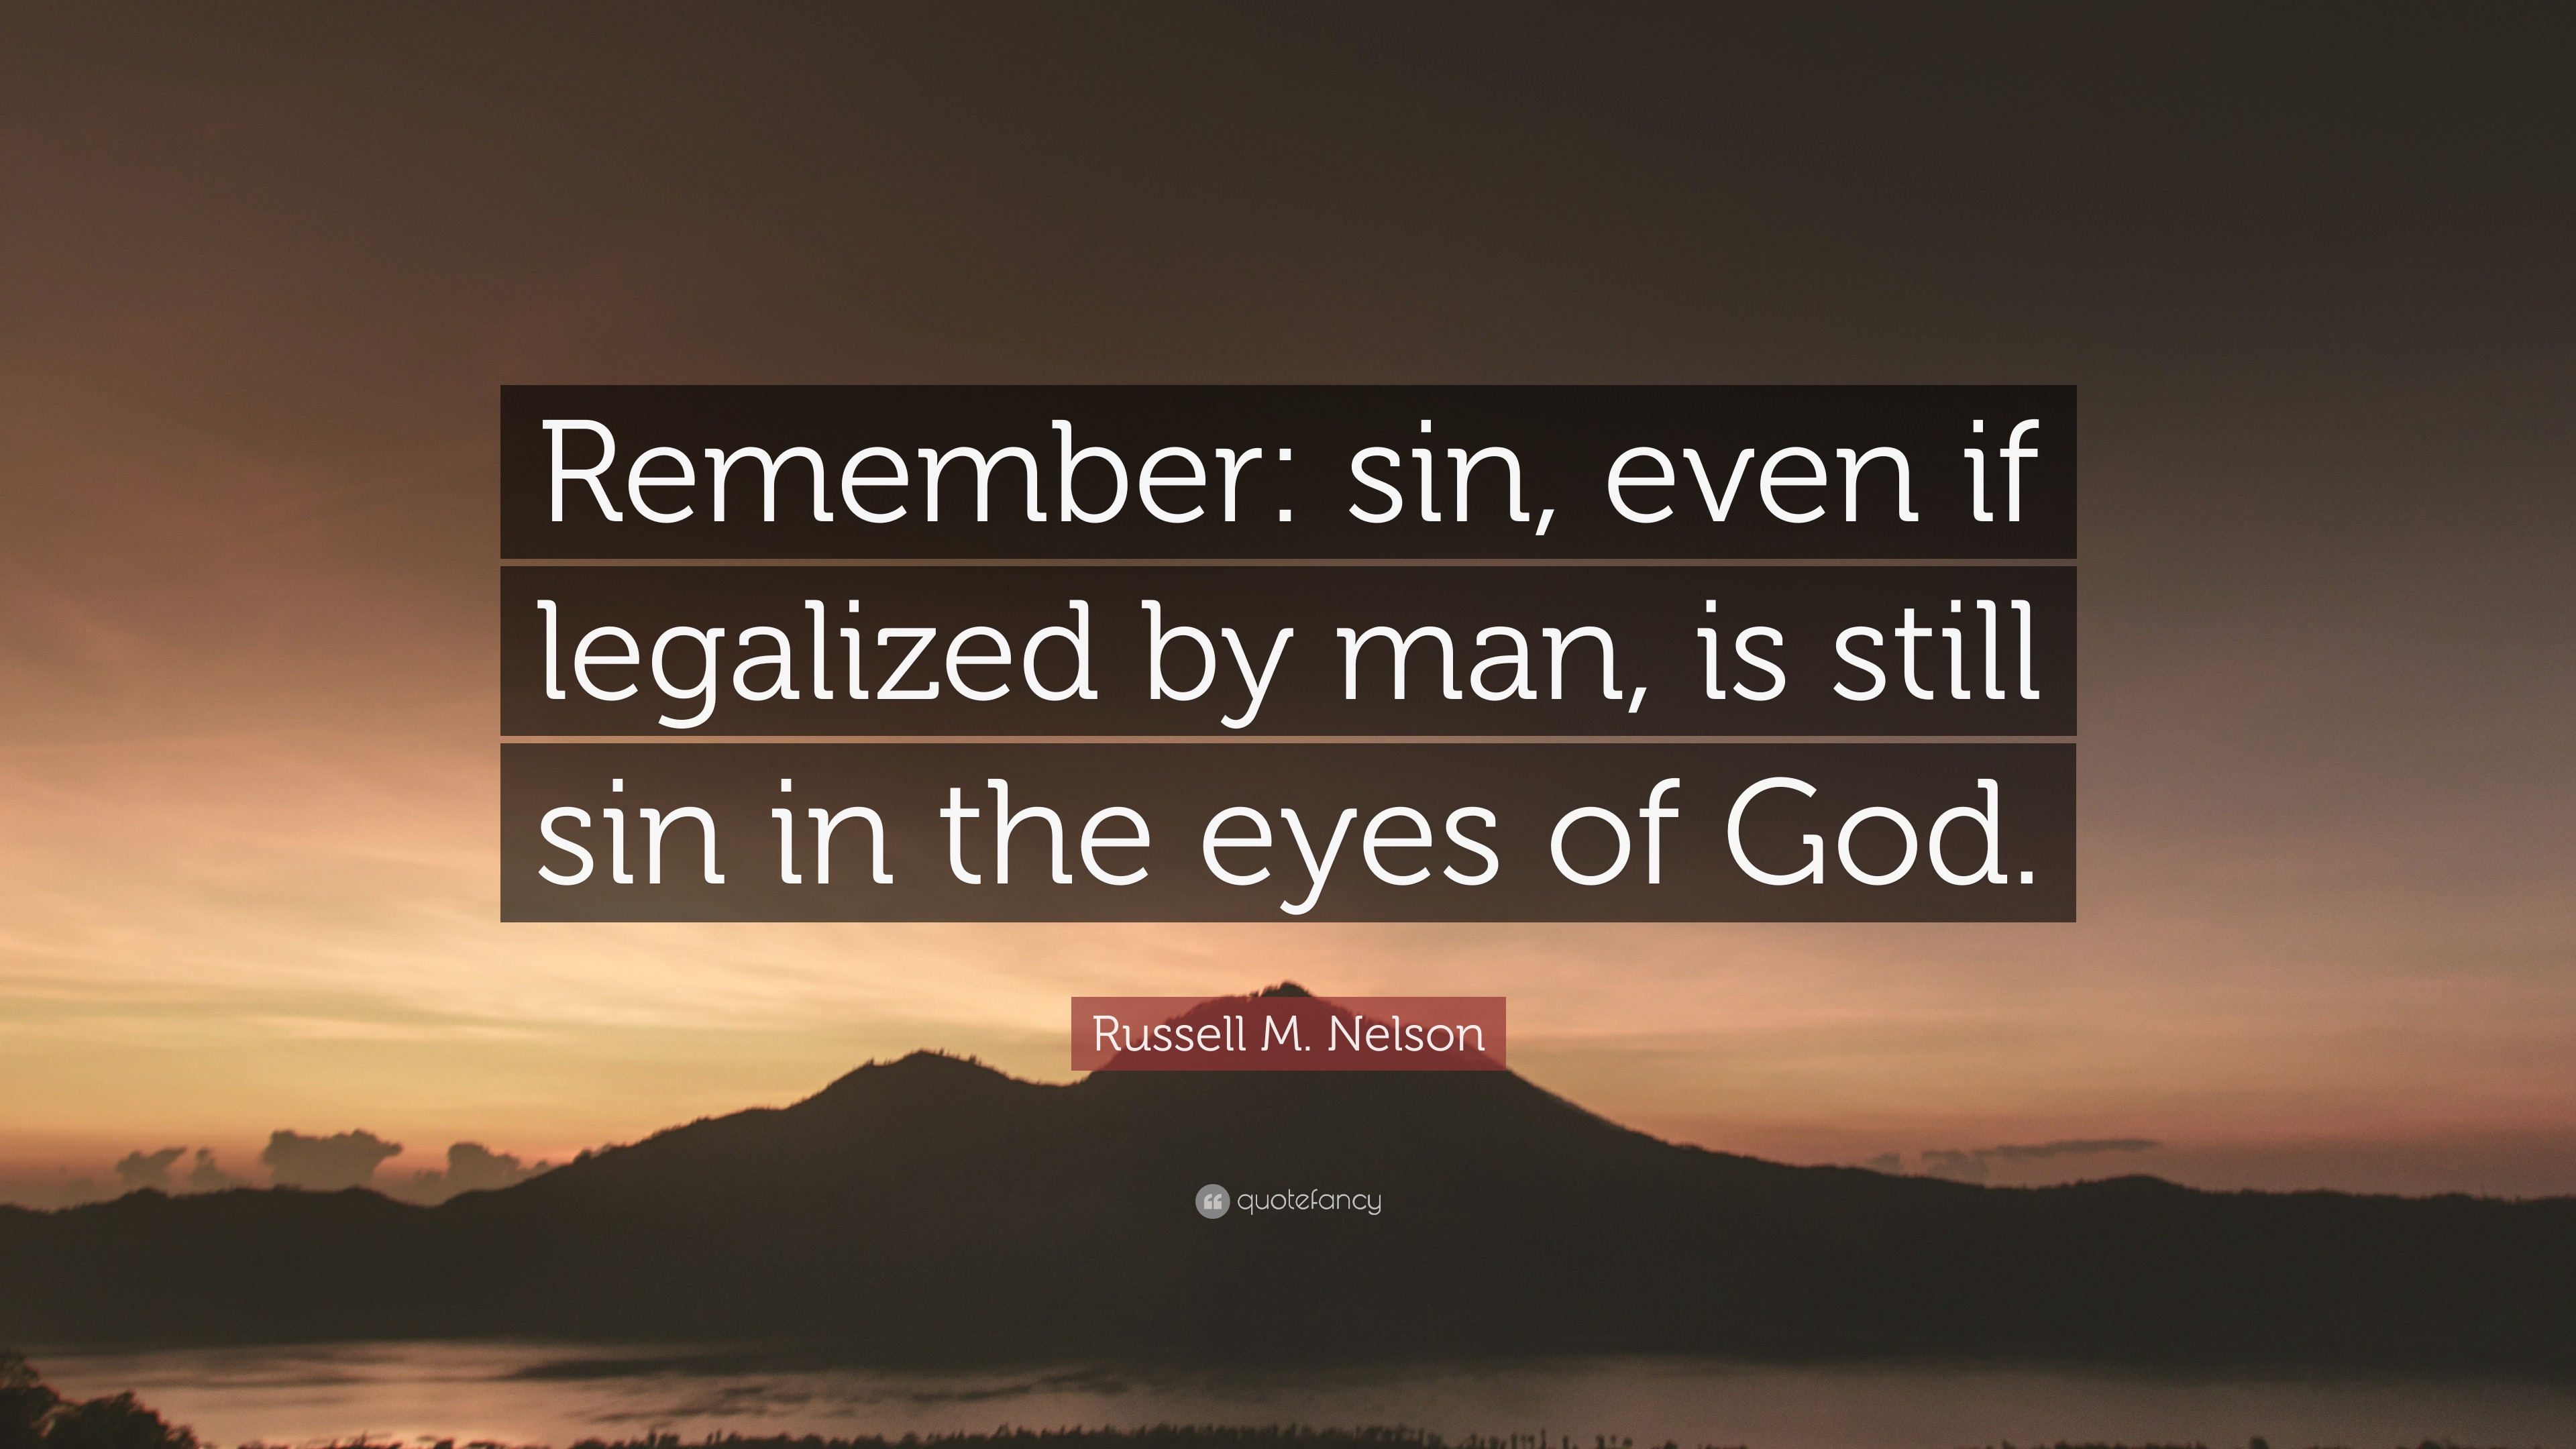 Russell M. Nelson Quote: "Remember: sin, even if legalized by man, is still sin in the eyes of ...